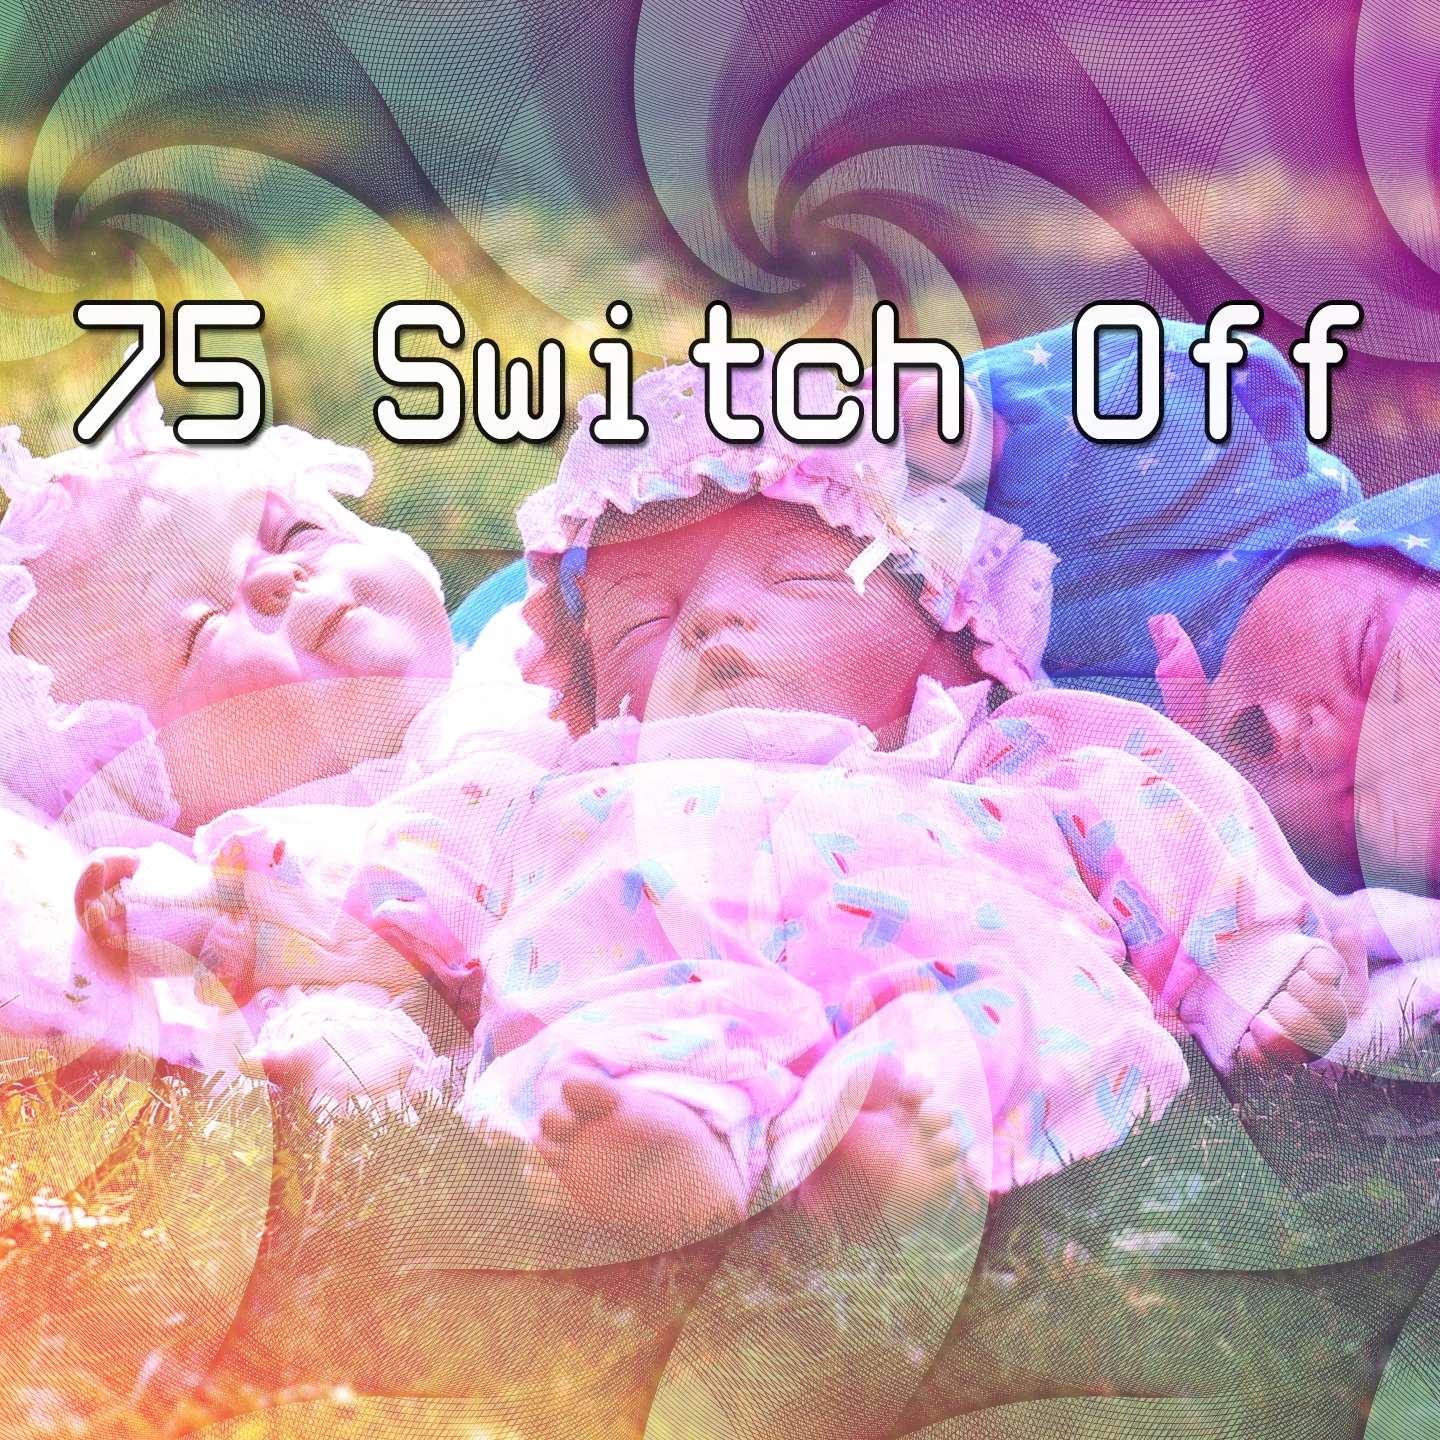 75 Switch Off